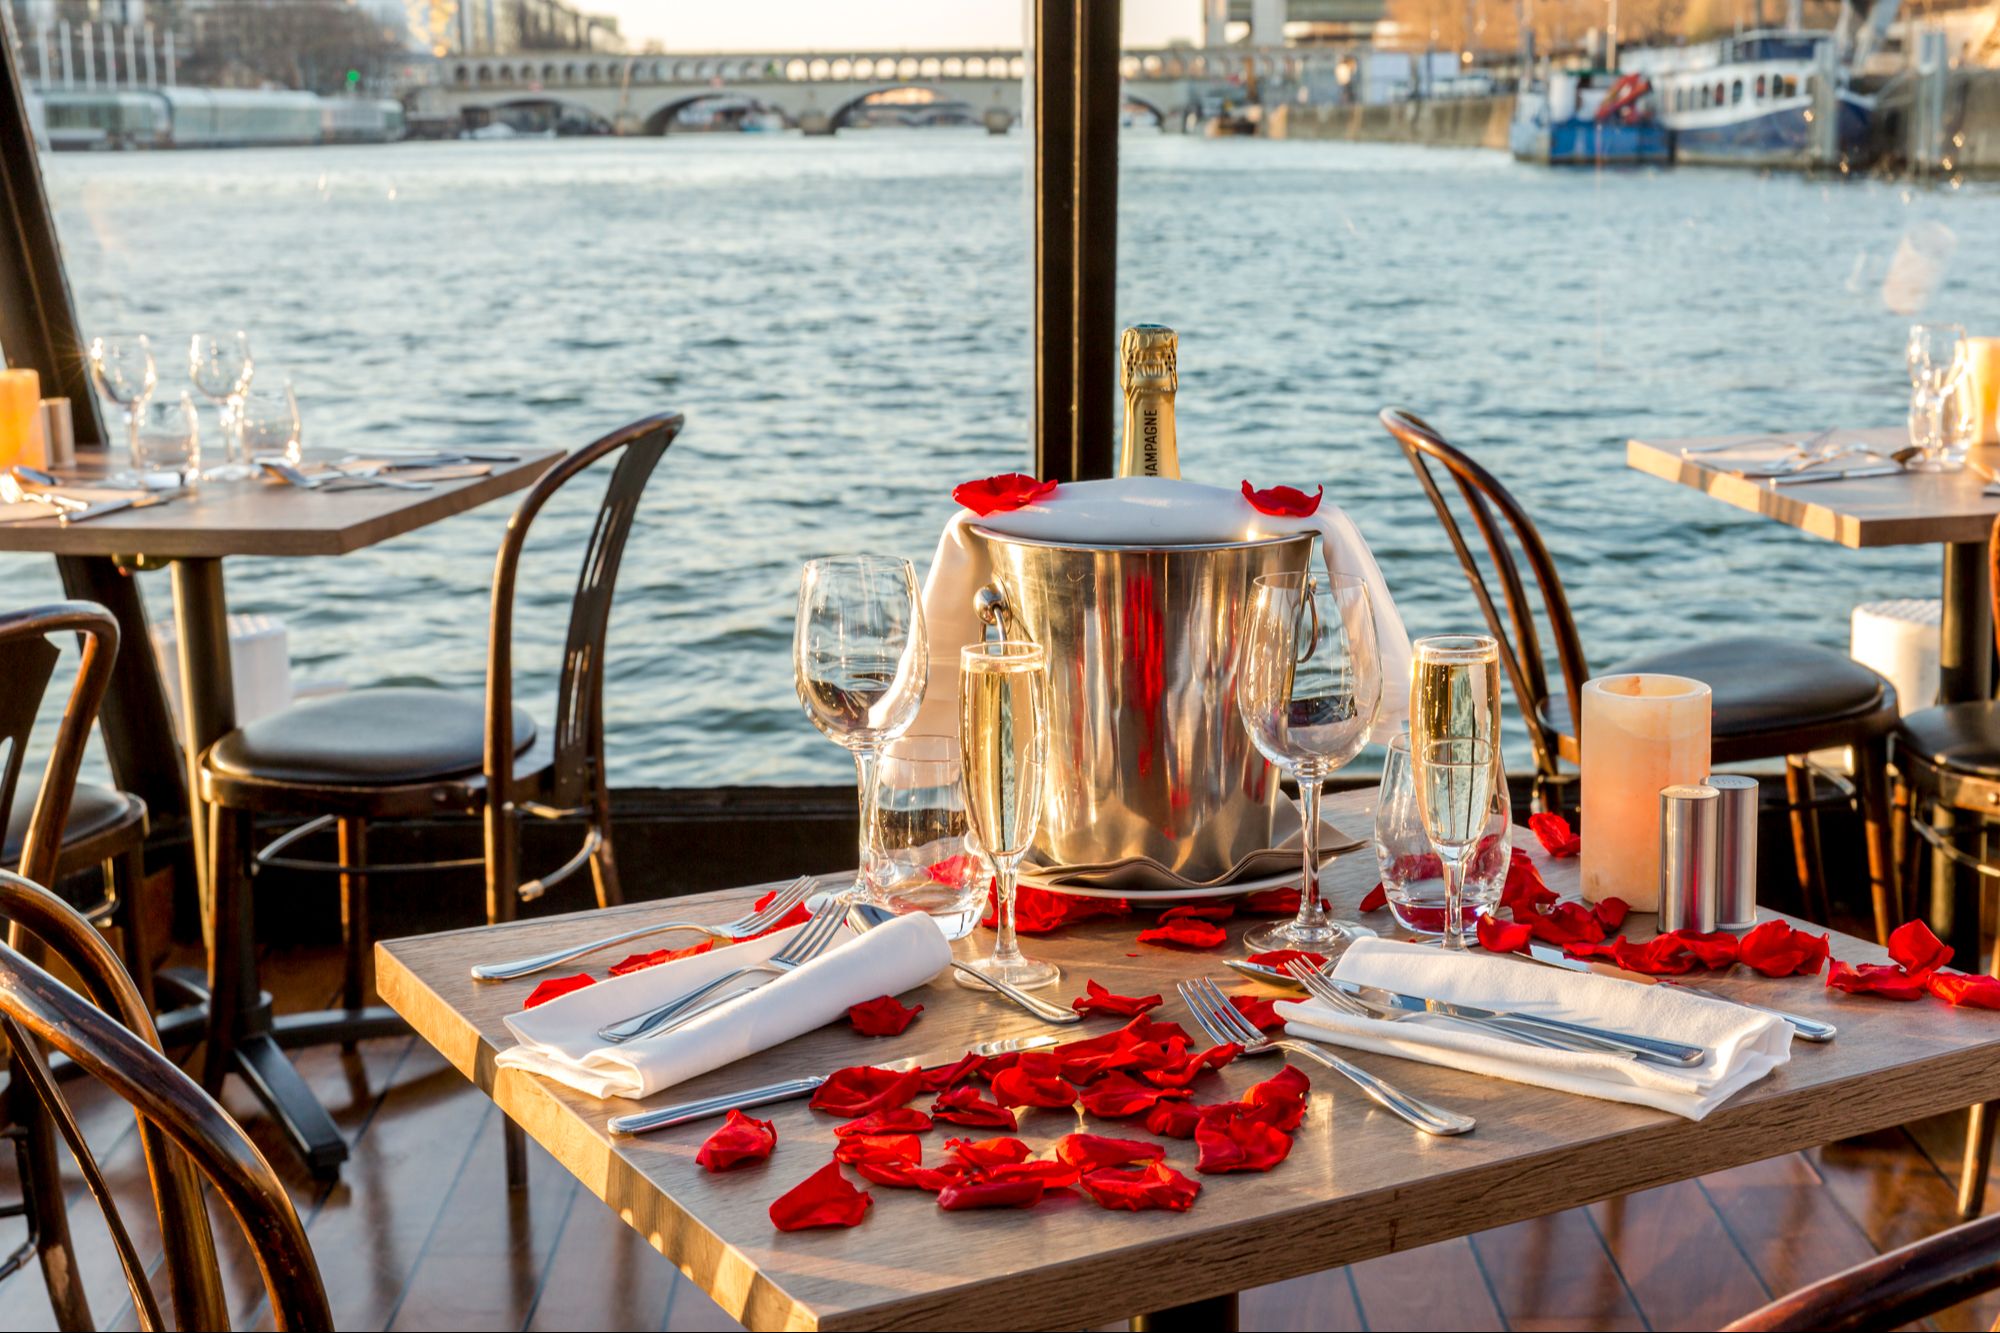 Romantic Seine River Lunch Cruise, Table at the bay window, Drinks included